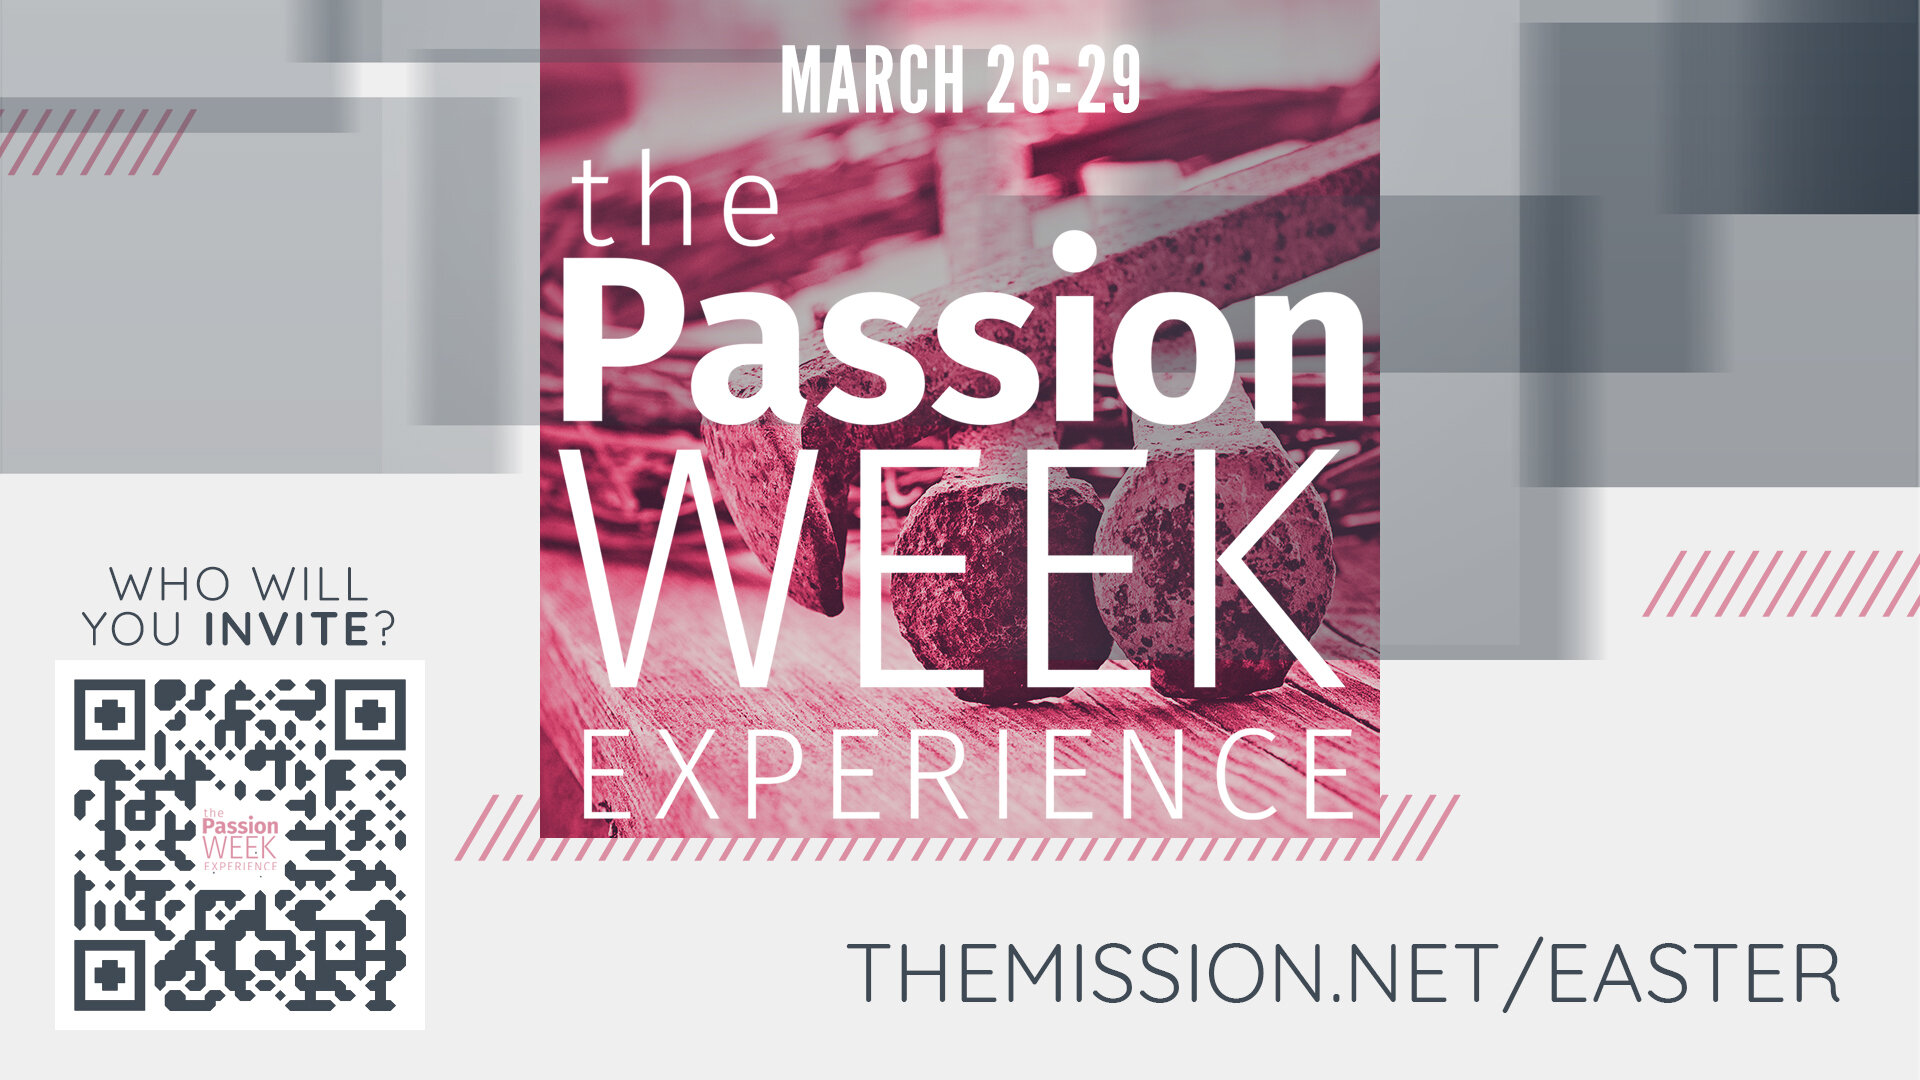 Experience the majesty and mystery of the One who changes everything.

The Passion Week Experience is an interactive devotional encounter with the stations of the cross. Discover the Last Supper, pray in the Garden of Gethsemane, feel the nails and c